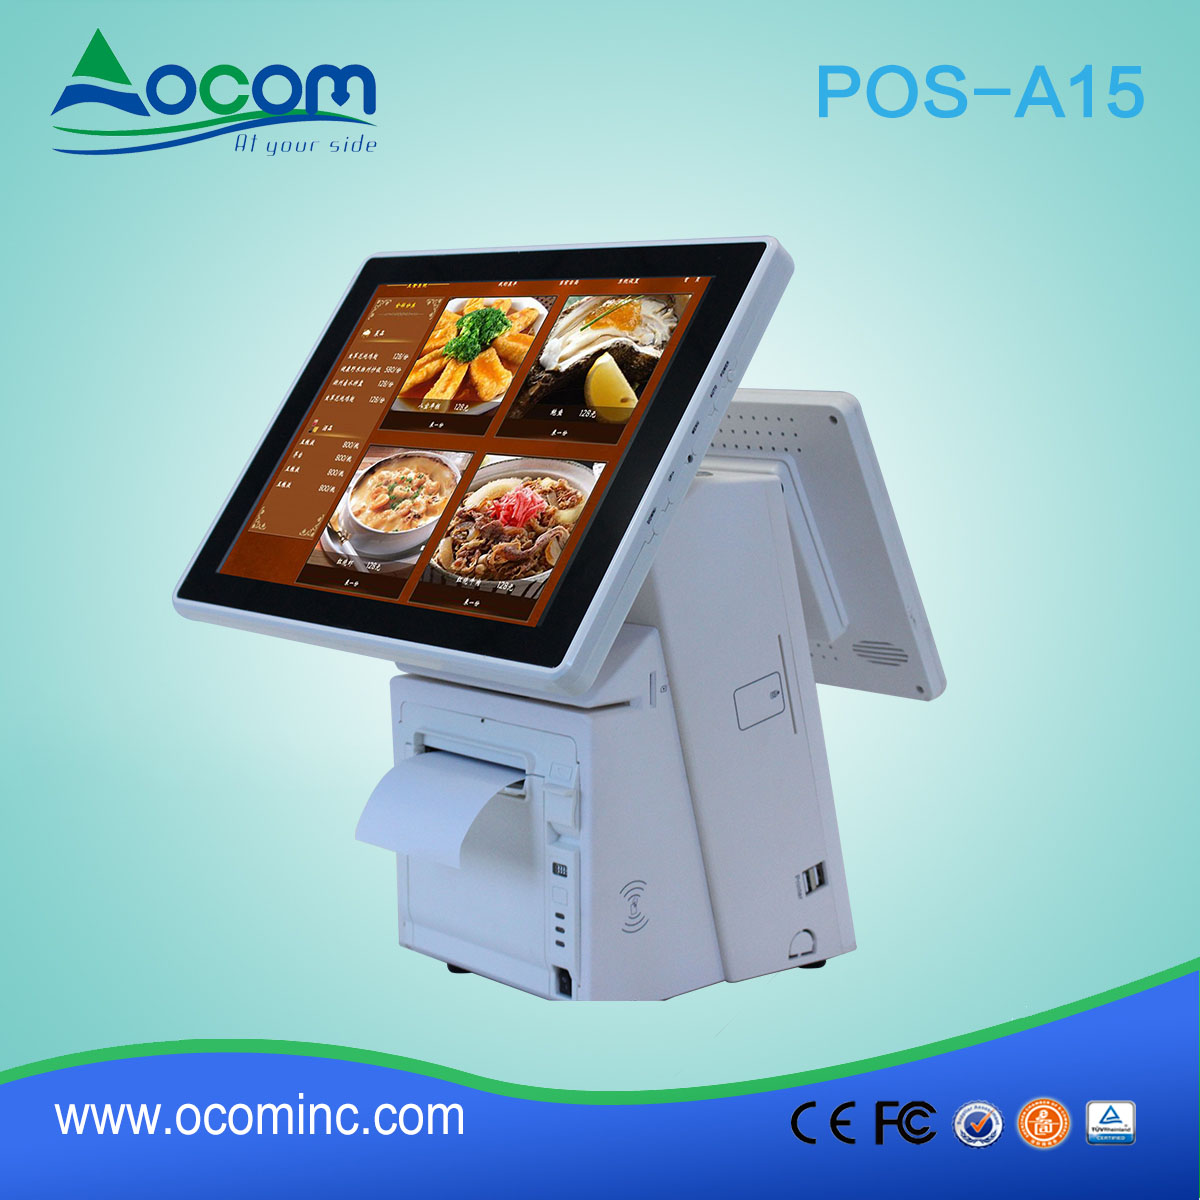 POS-A15 pos all-in-one Pos terminal met secundaire scherm optioneel